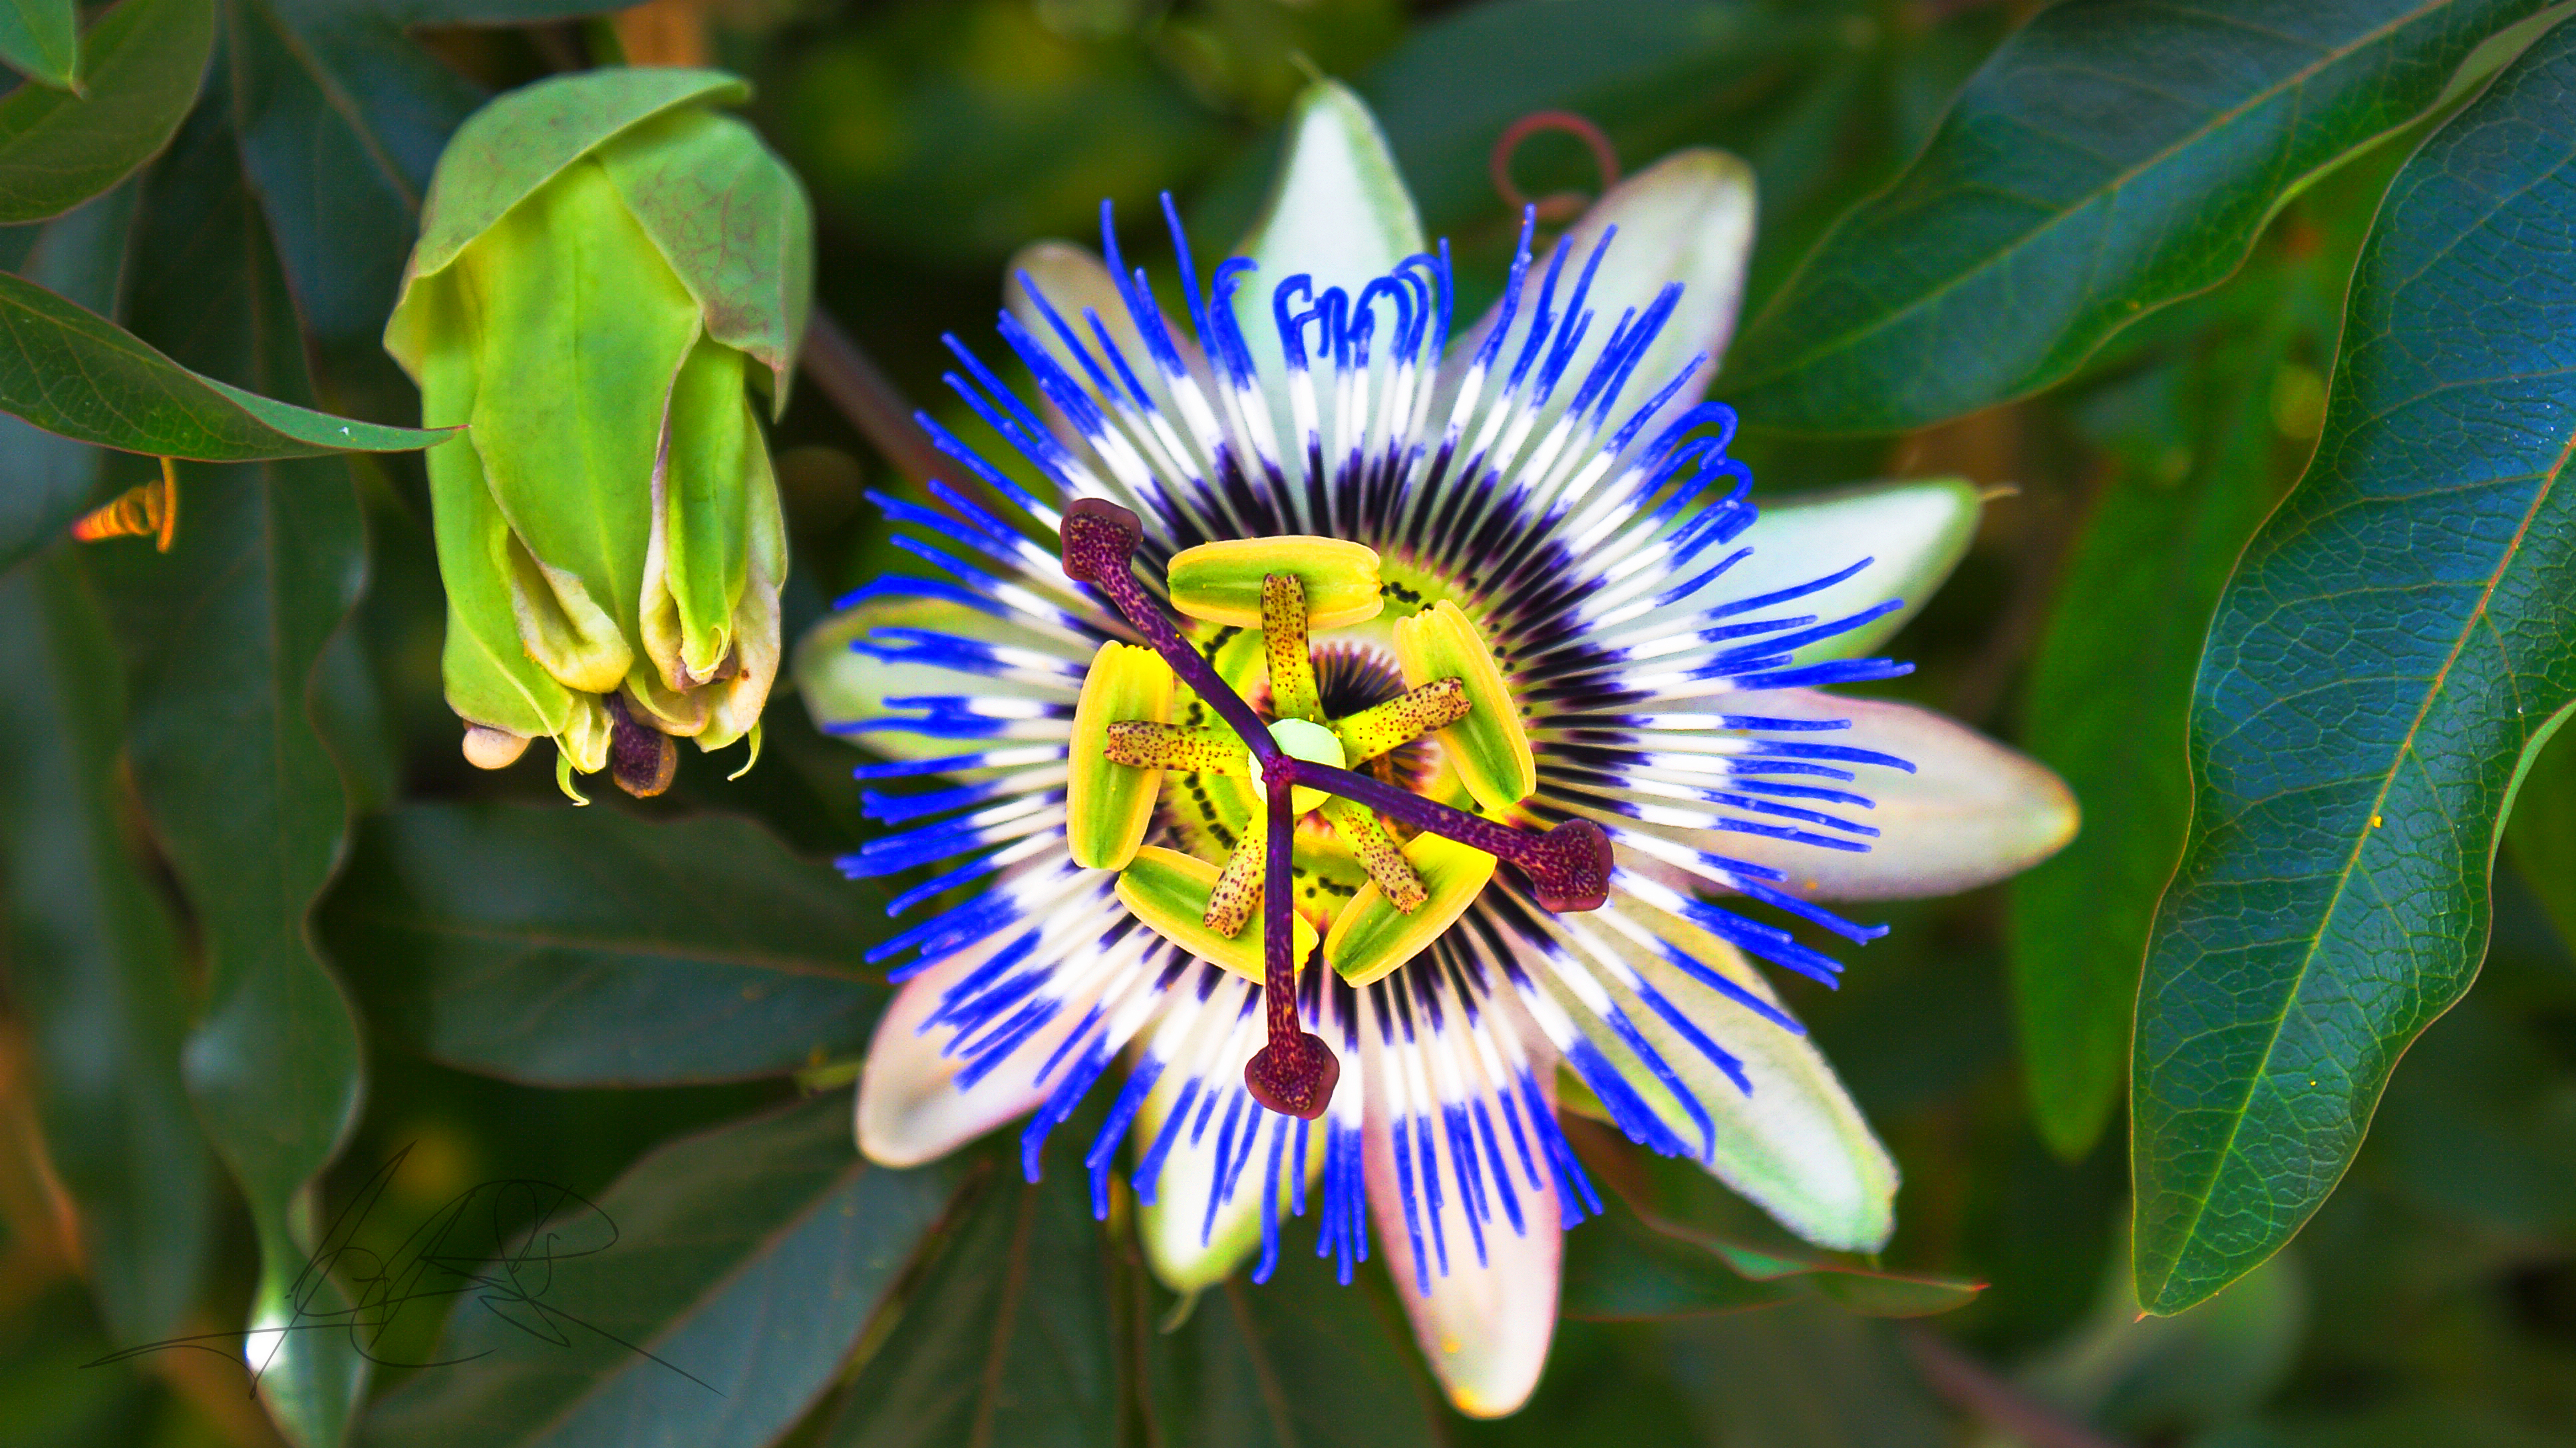 Passion of the passion fruit flower | Windows to Whatever